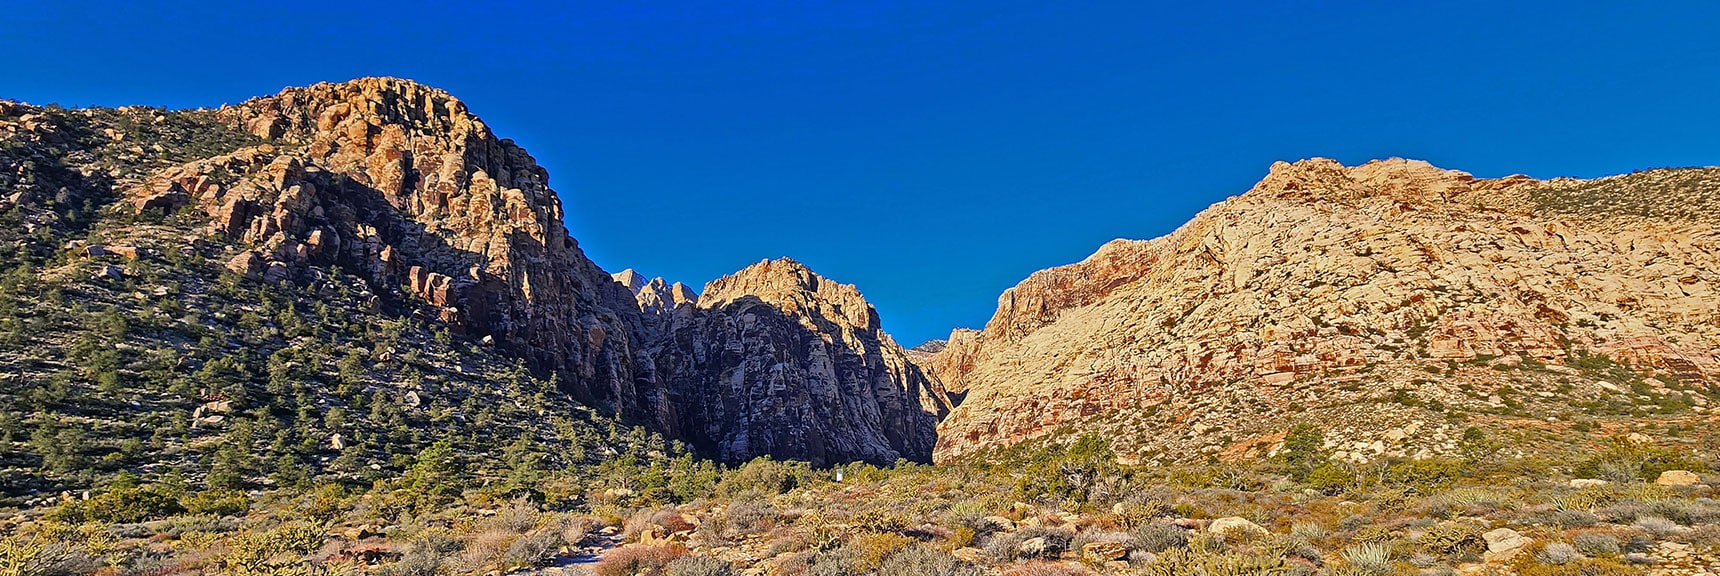 View of Ice Box Canyon At Summit of Stairway | Ice Box Canyon | Red Rock Canyon NCA, Nevada | Las Vegas Area Trails | David Smith